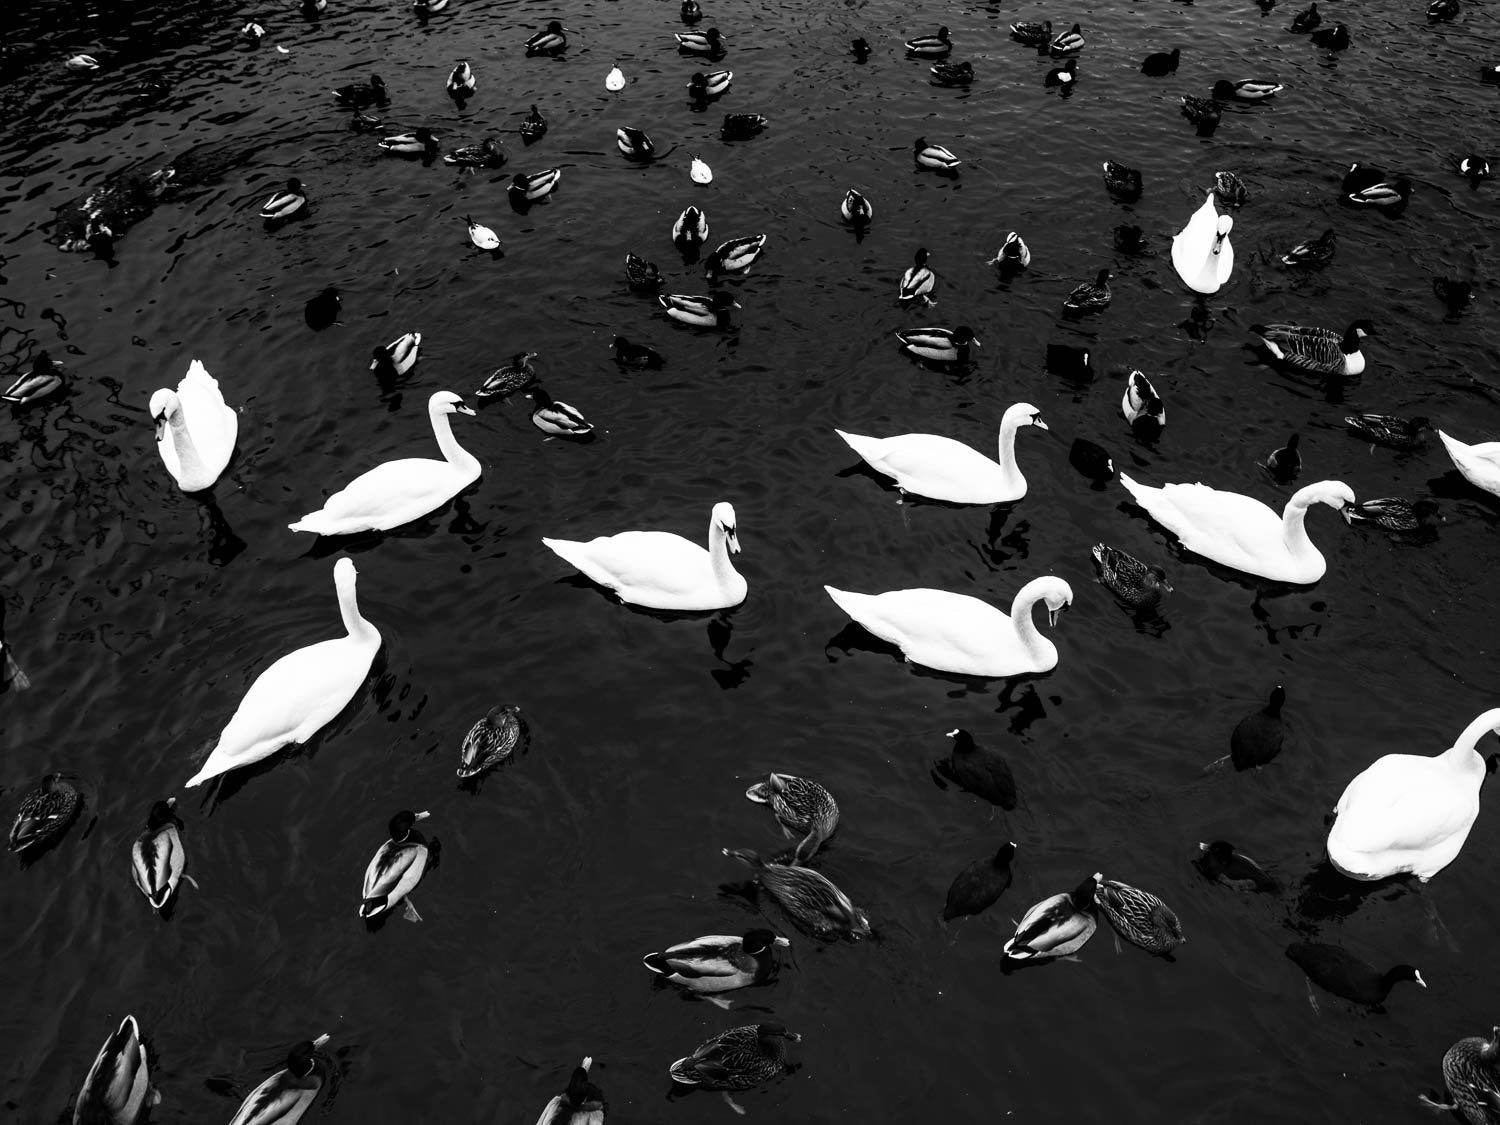 A lot of Black and white color ducks in the watercourse, Sweden #20